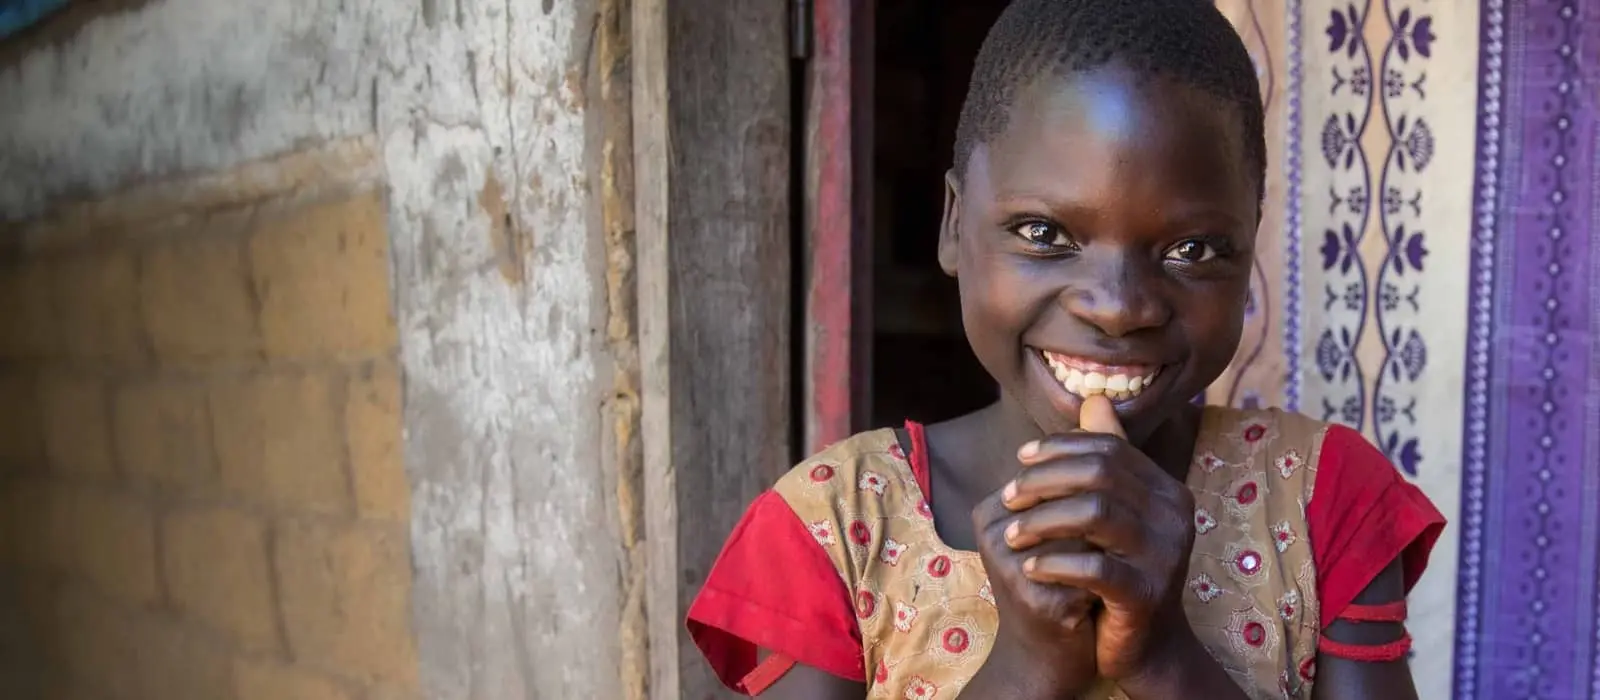 Nana (9) at her home in Katchumbuyu, DRC